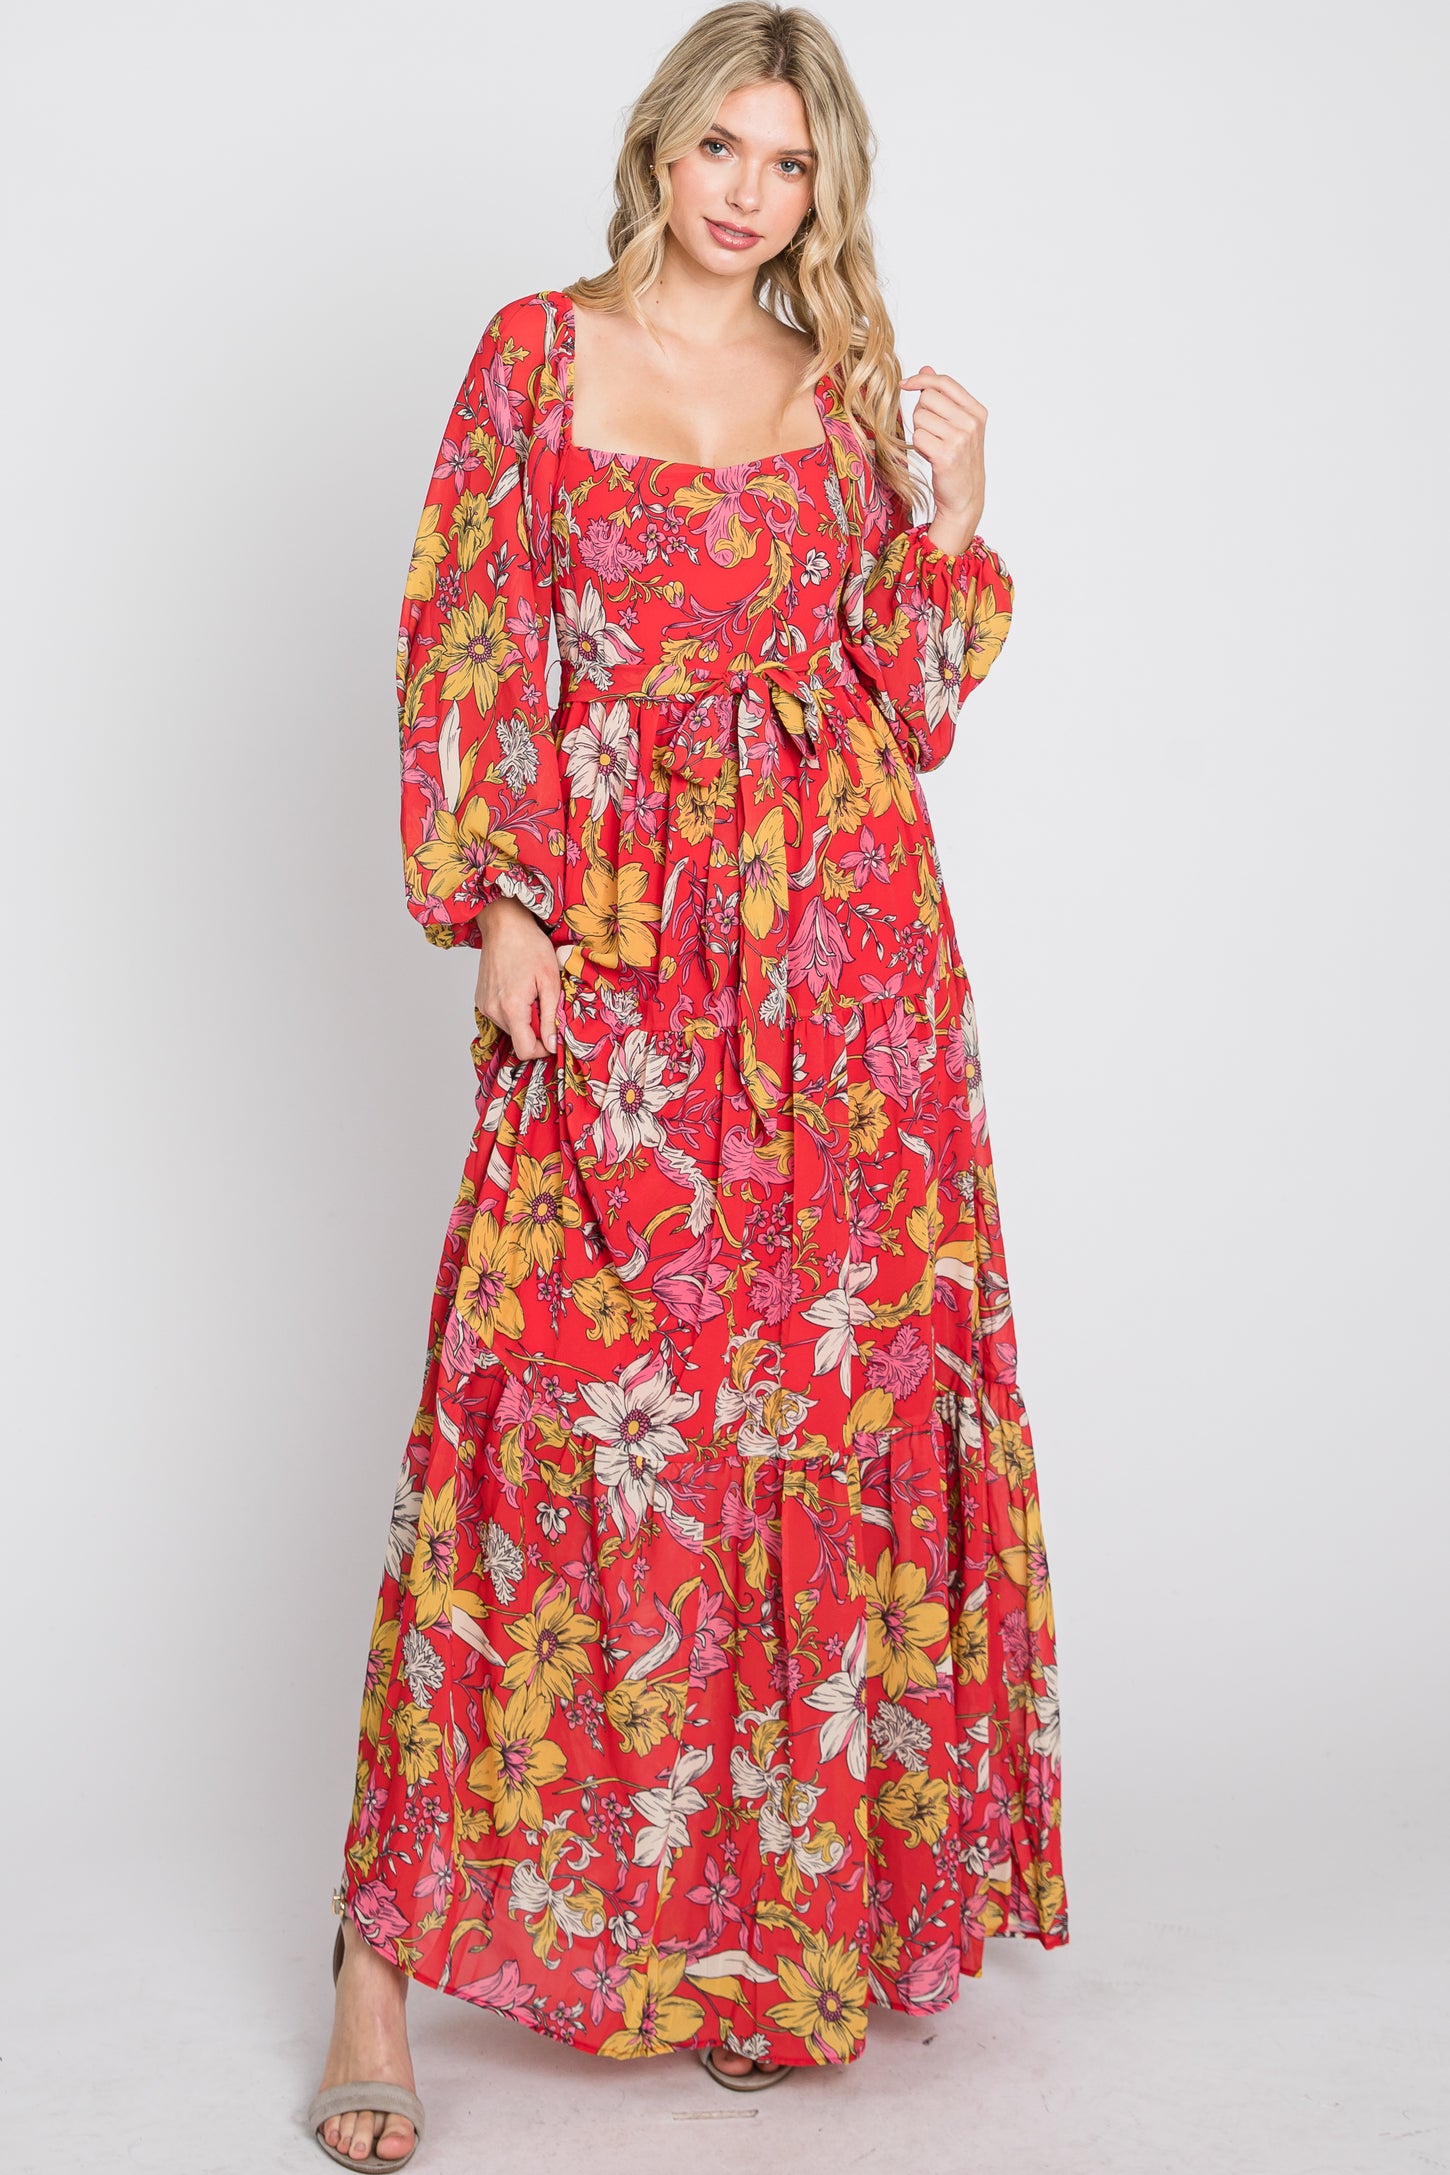 Red Floral Chiffon Square Neck Flowy Maxi Dress